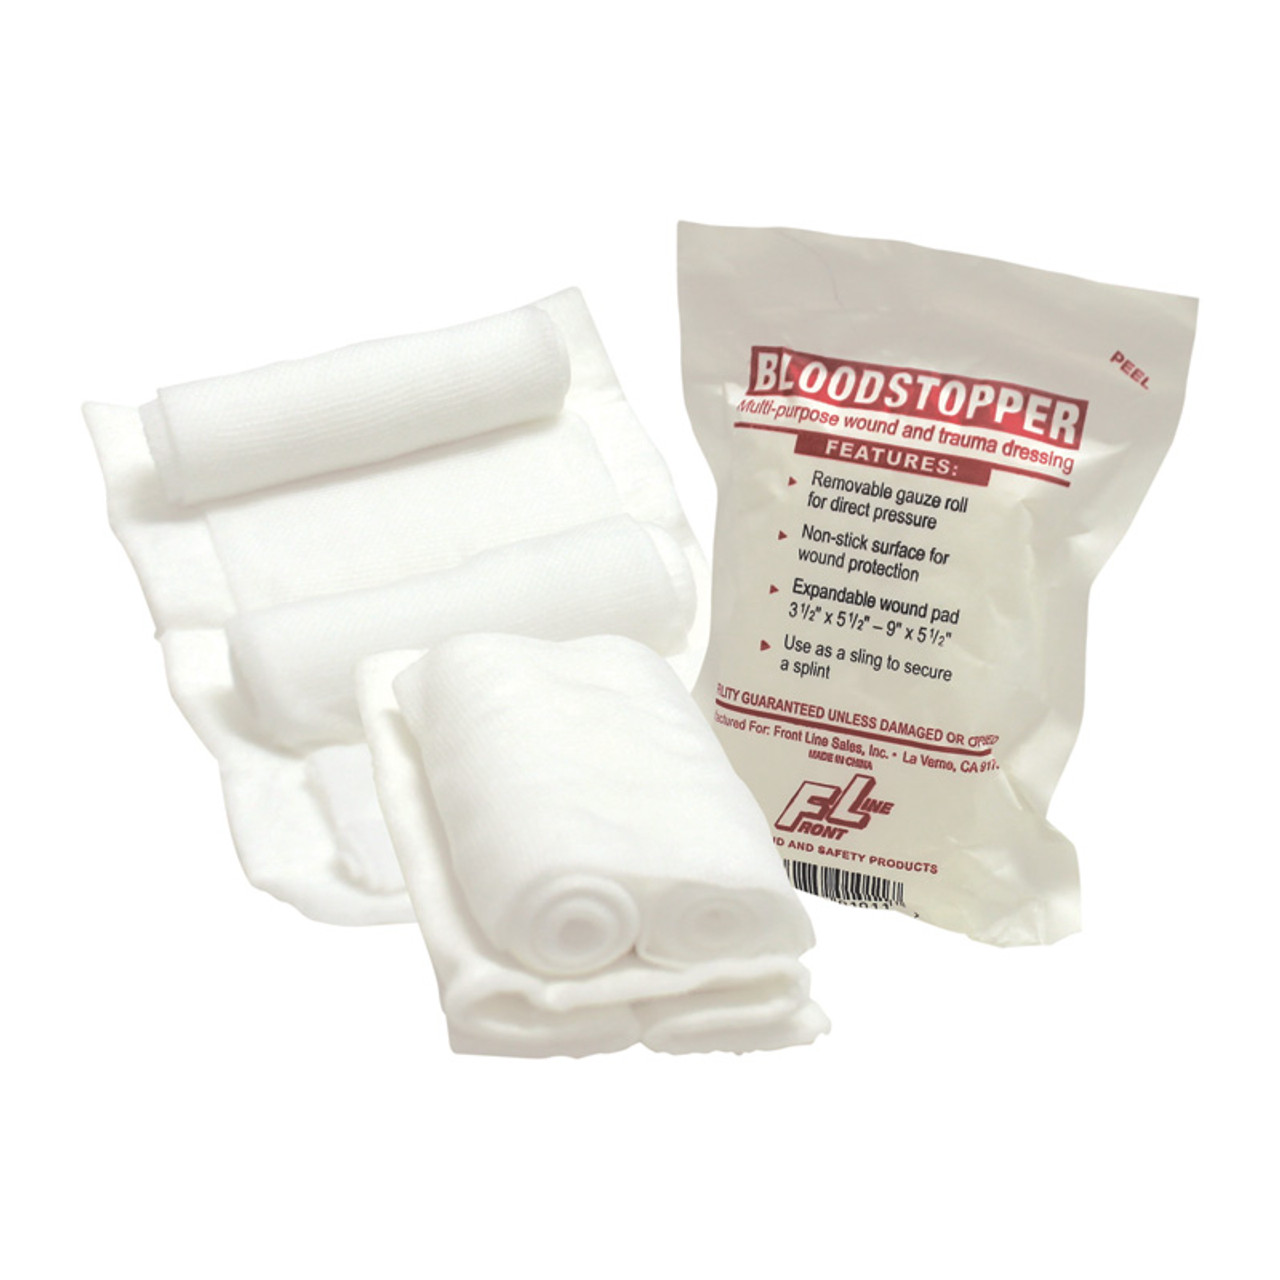 Sterile Absorbent Cotton, 1/2 oz (Roll), case/72